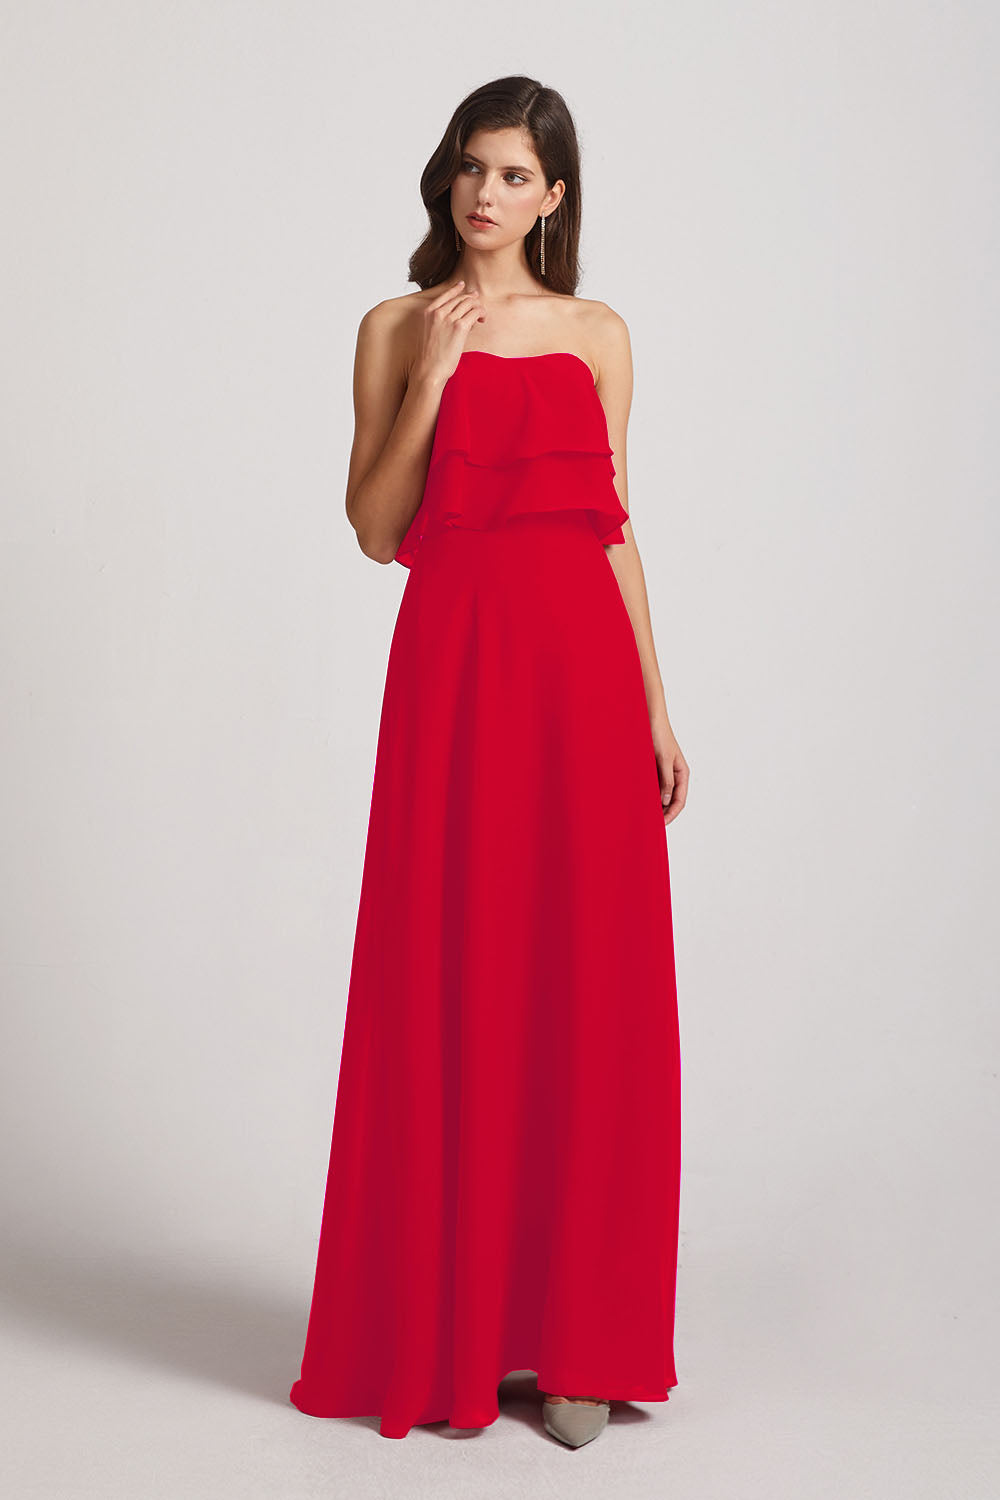 Alfa Bridal Red Strapless Chiffon Bridesmaid Dresses with Tiered Ruffles (AF0086)